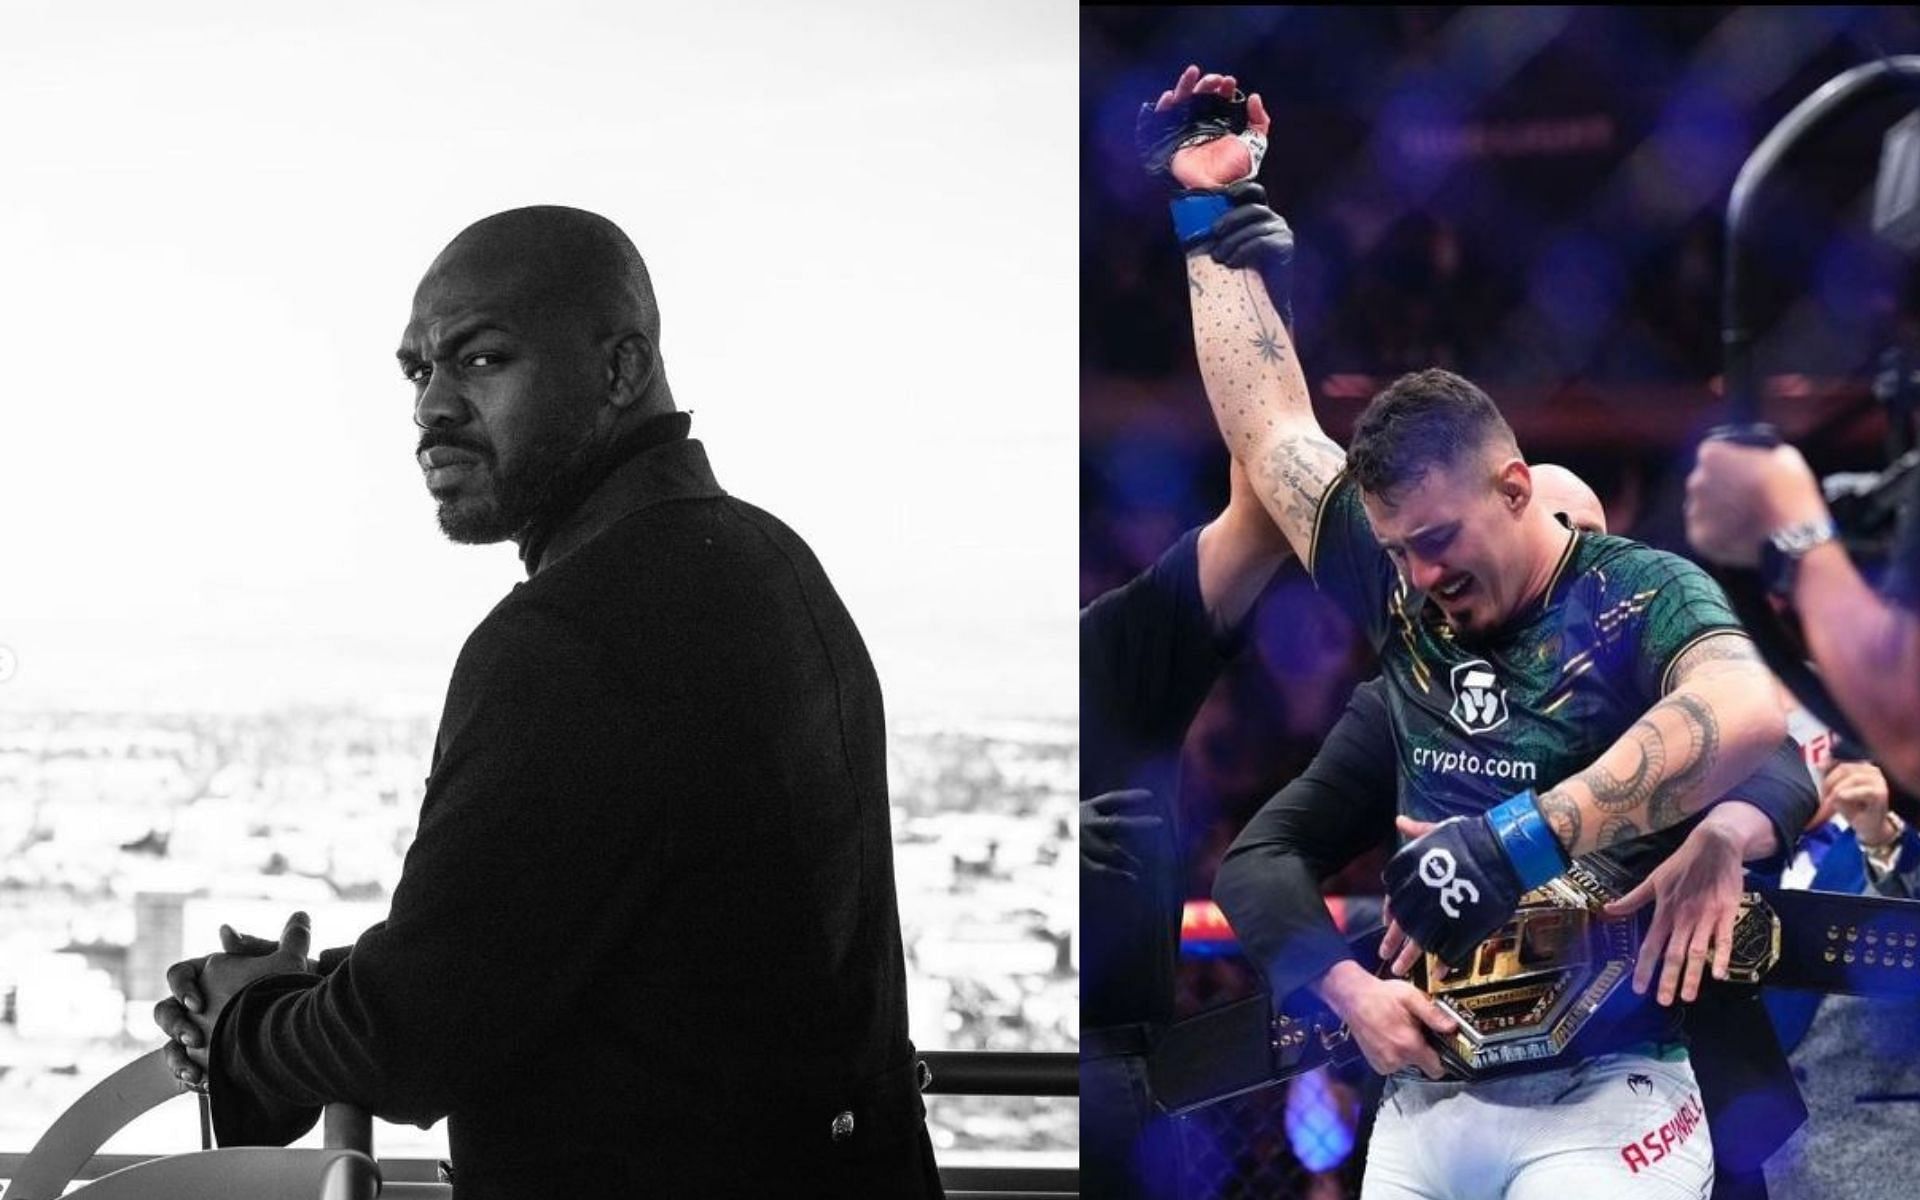 Jon Jones (left) sends message to haters regarding a possible unification fight with Tom Aspinal (right). [Image credit: @jonnybones and @tomaspinallofficial on Instagram]